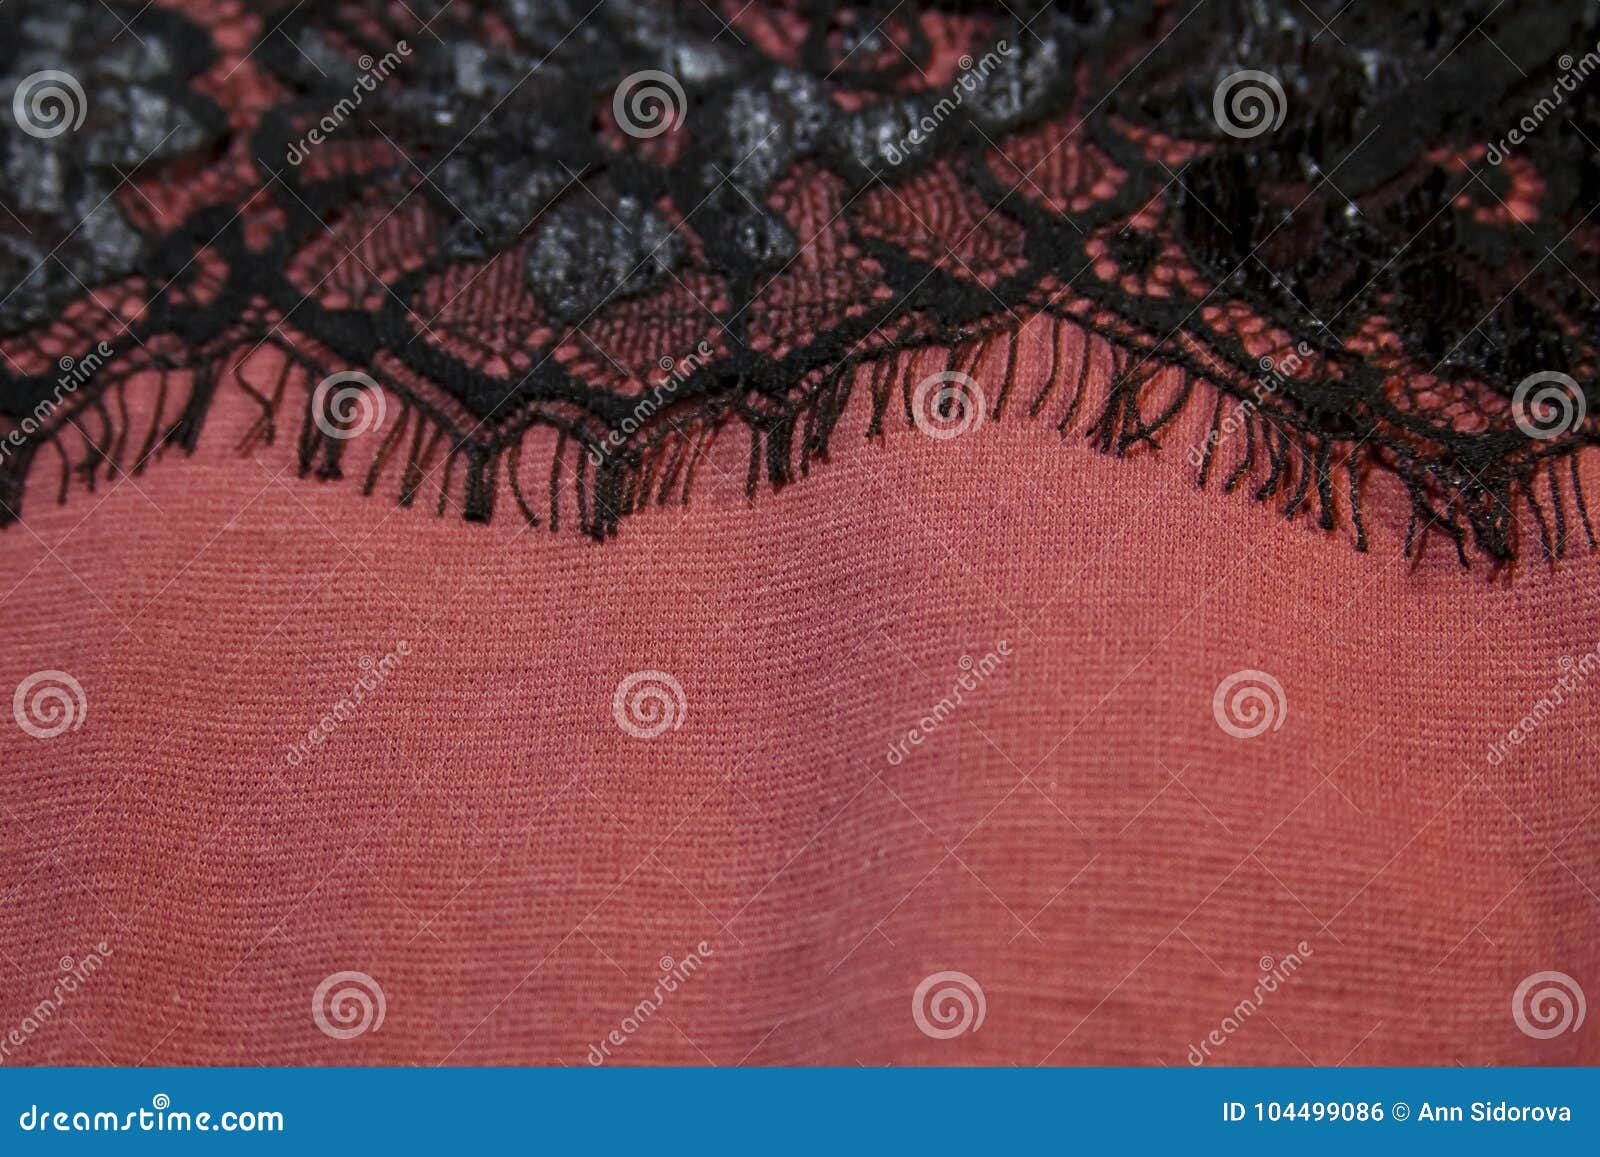 Border Black Lace on a Background of Burgundy Fabric Stock Photo ...